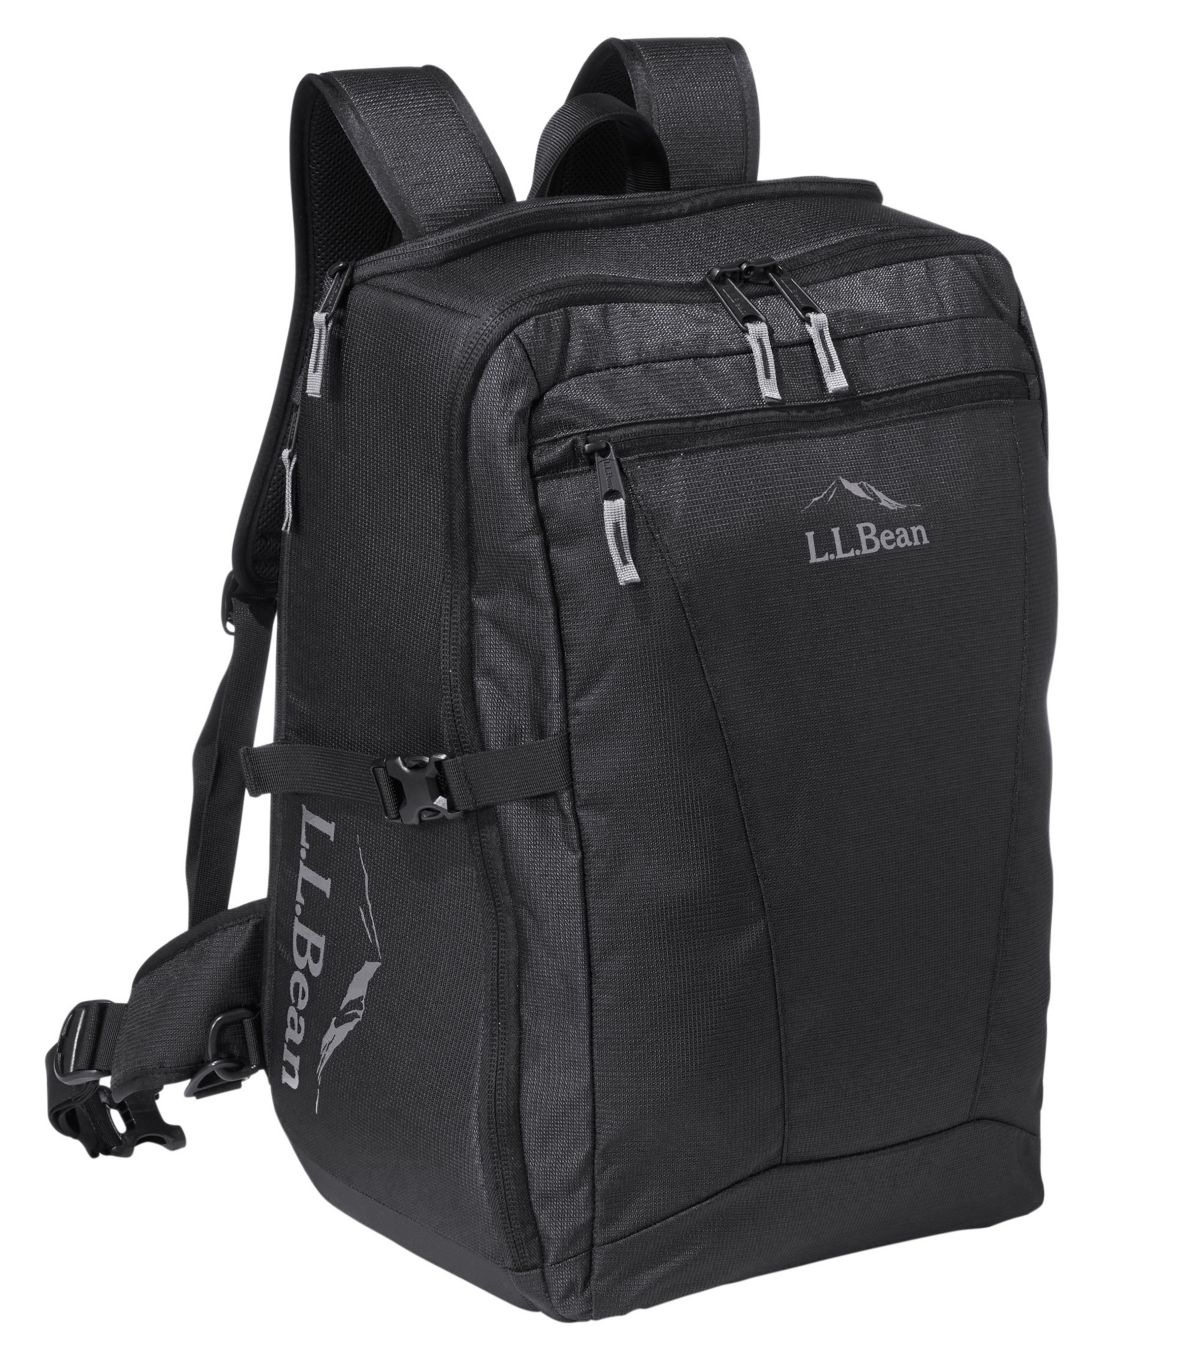 Approach Travel Pack, 45L